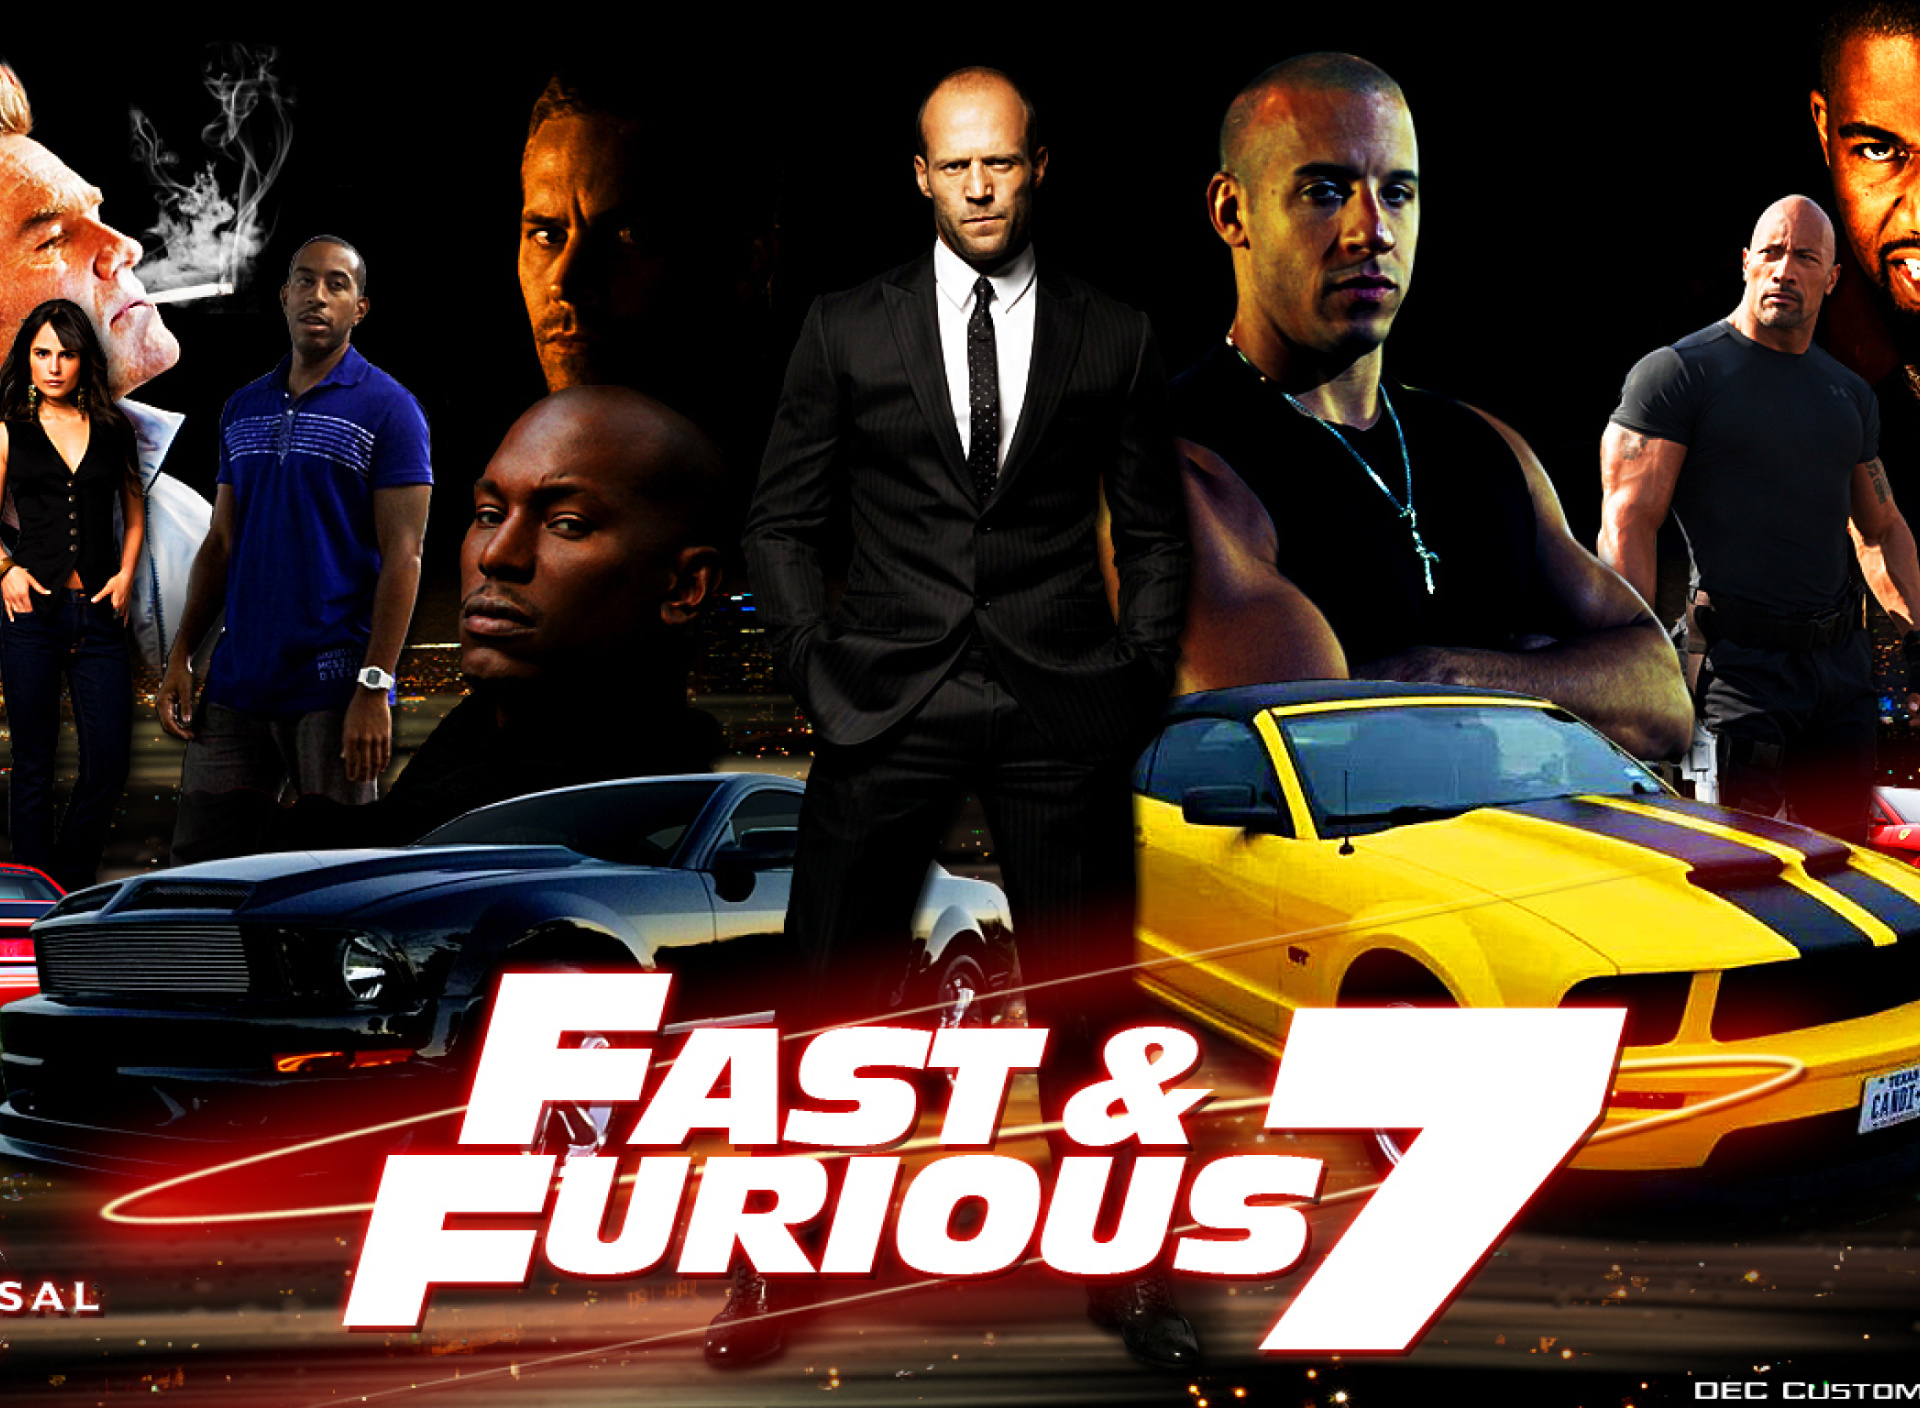 Fast and Furious 7 Movie wallpaper 1920x1408